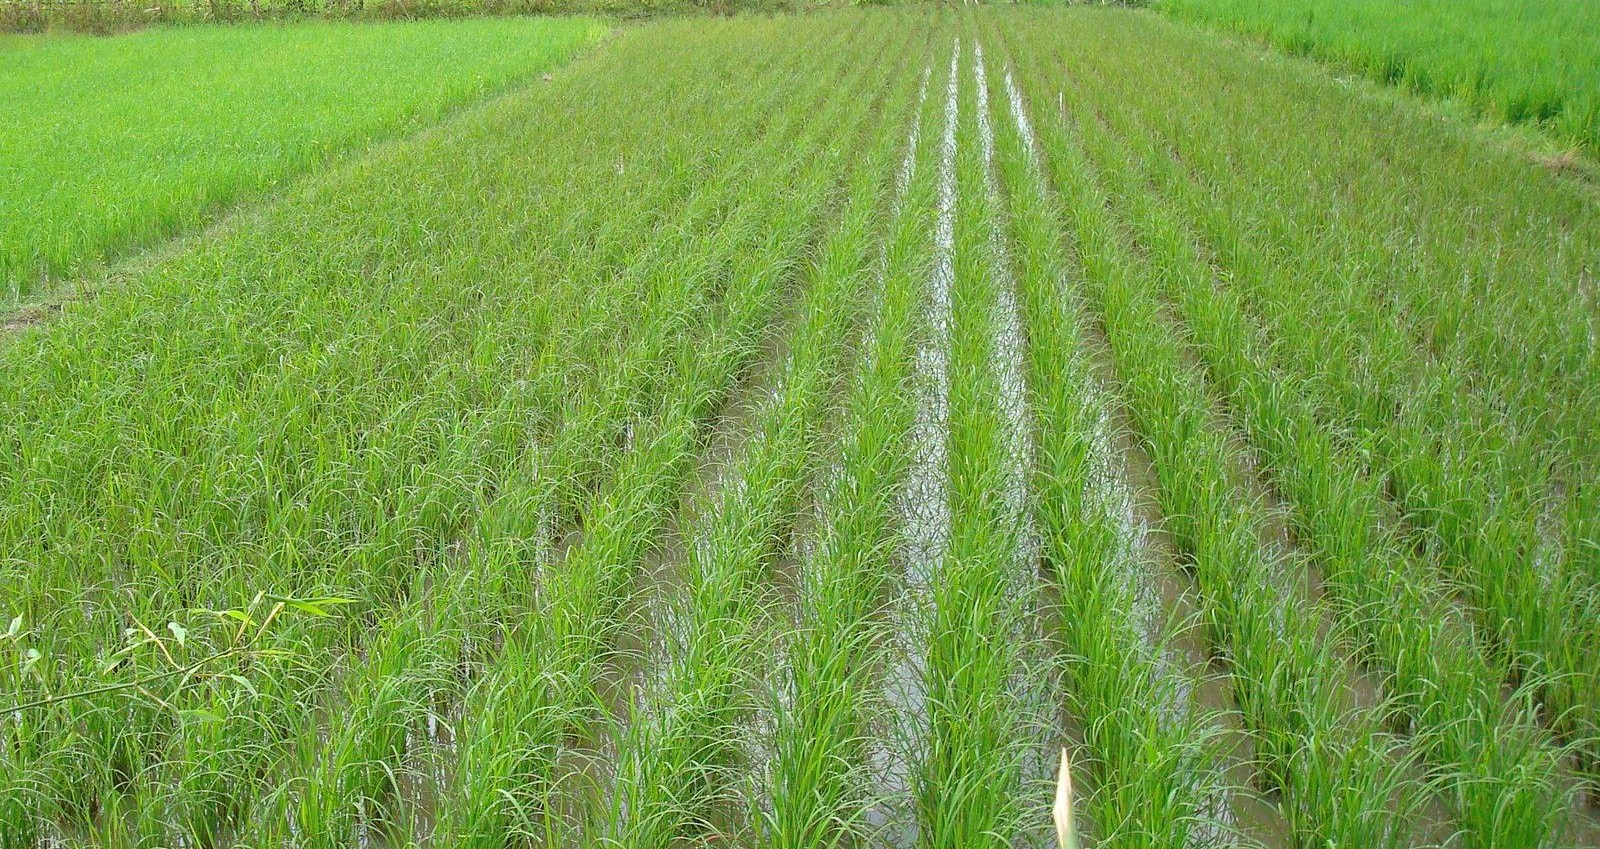 System of rice intensification